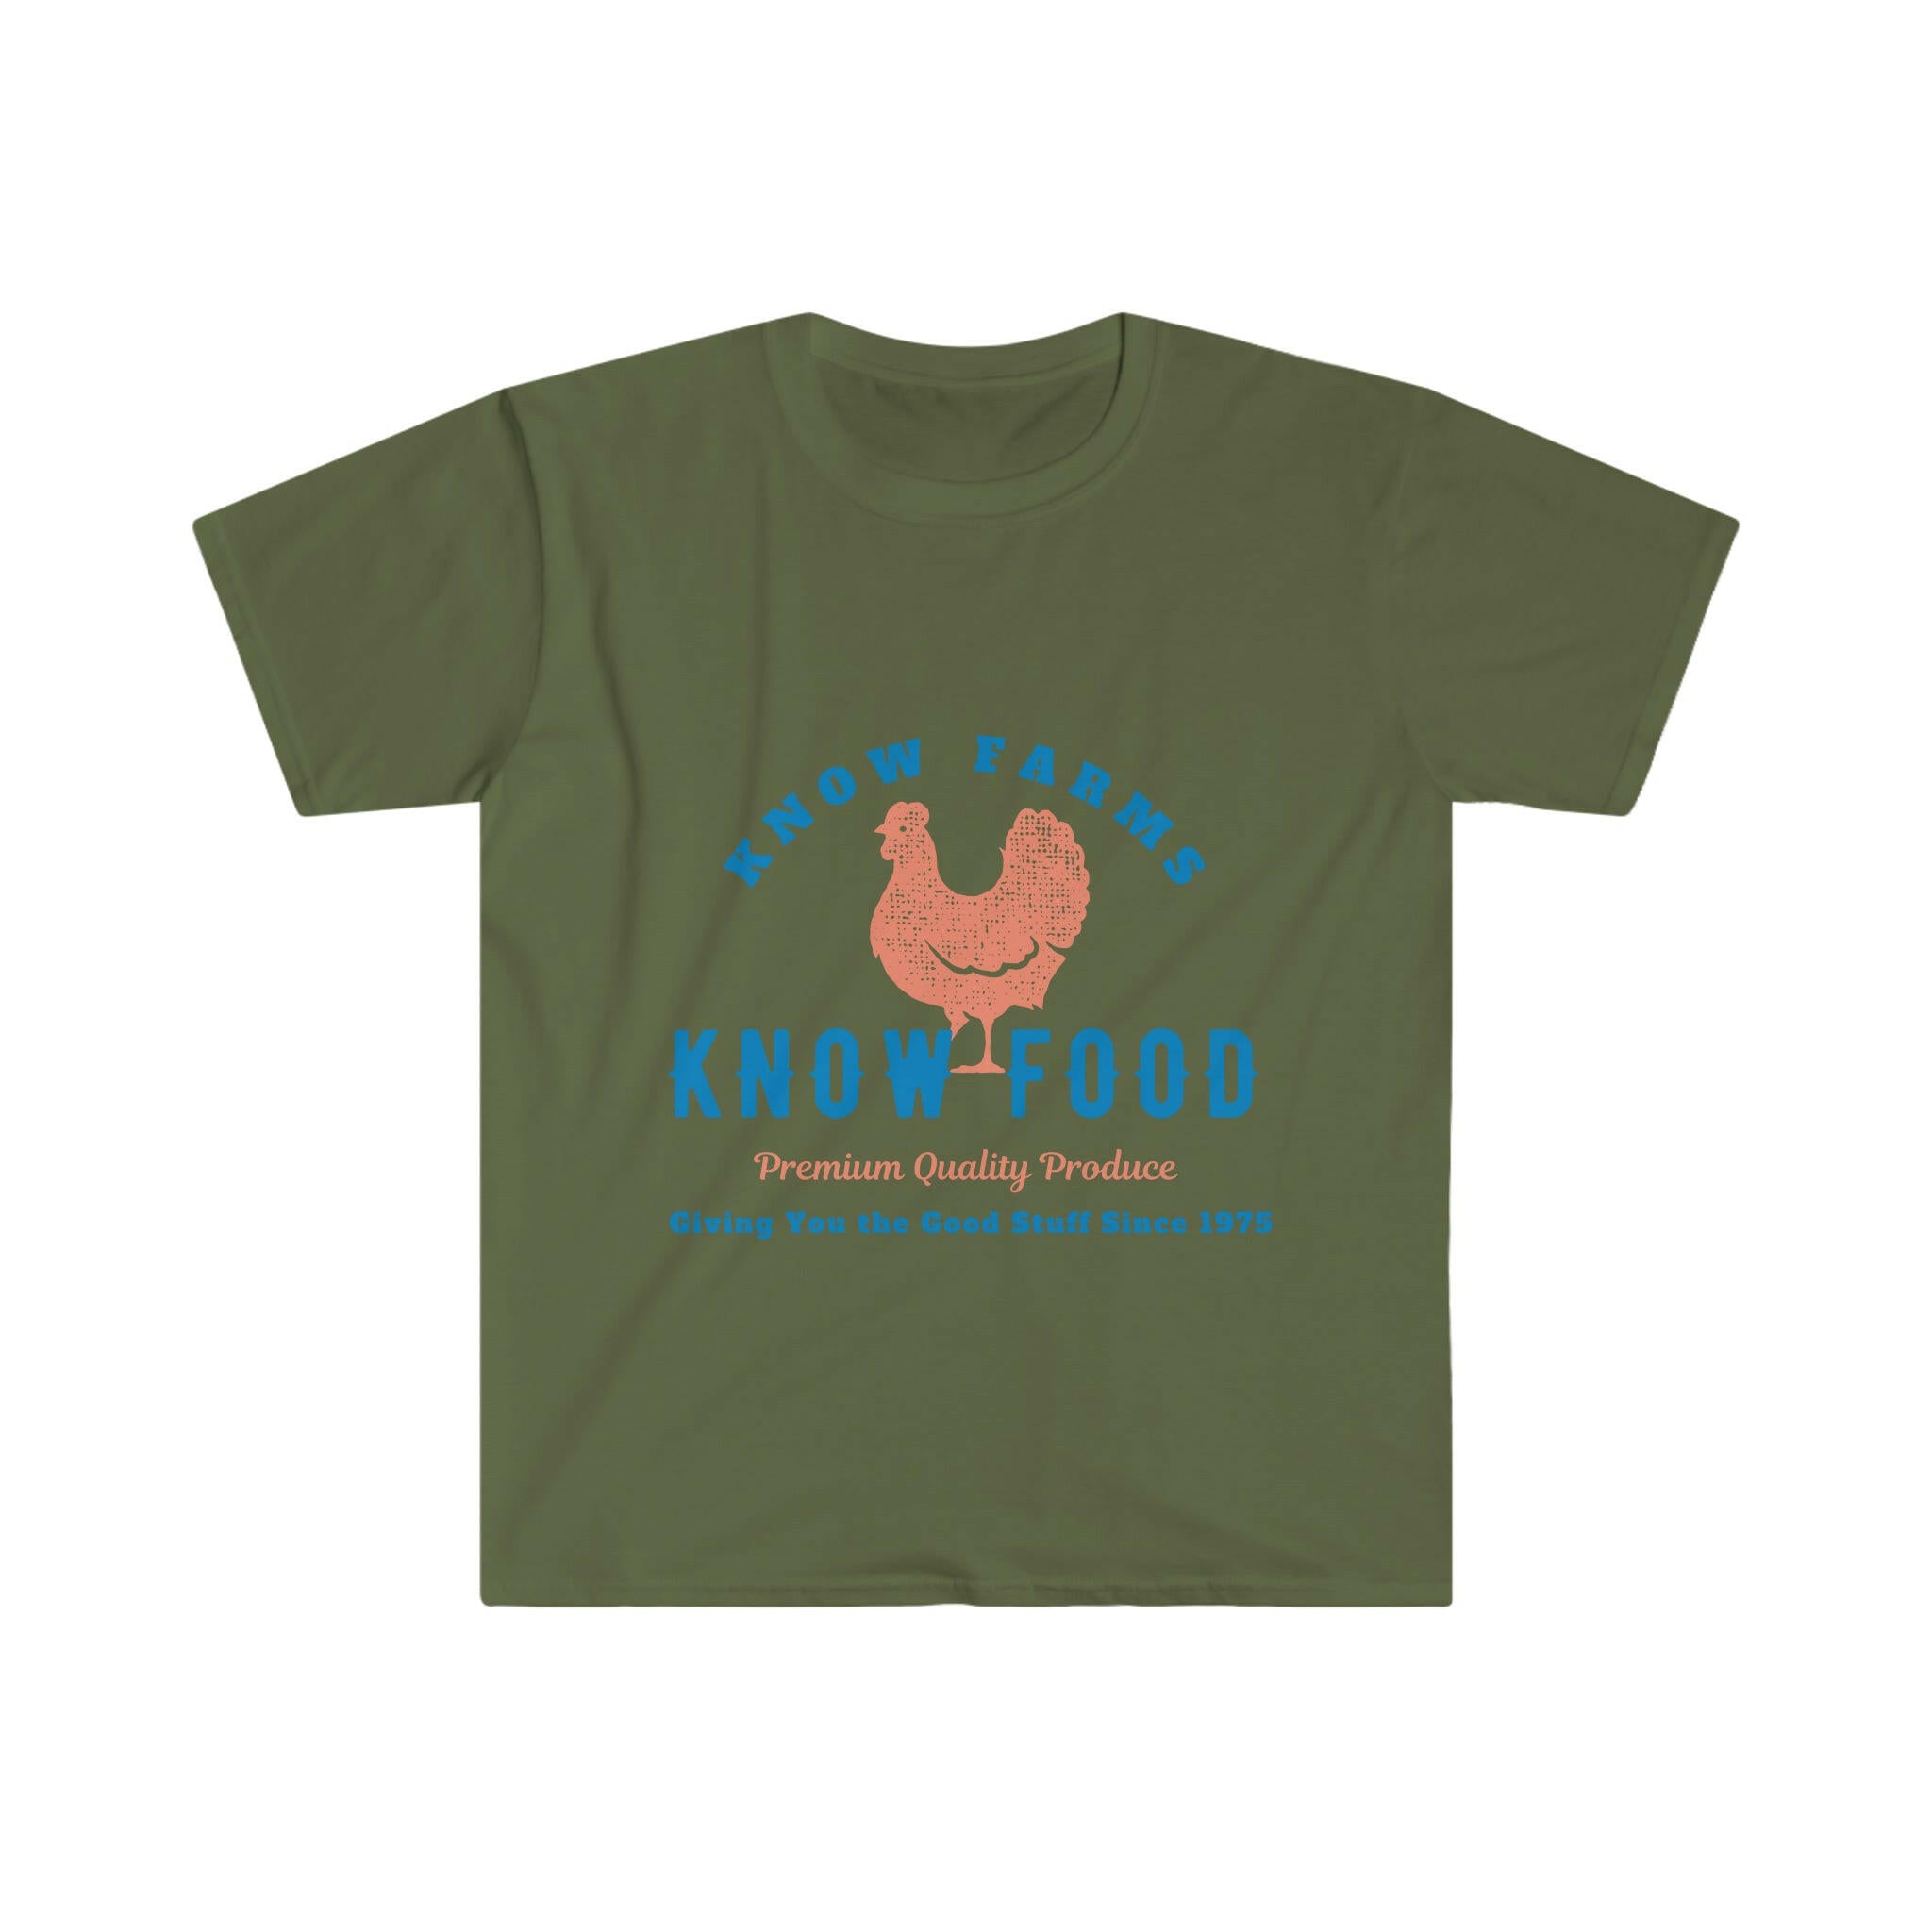 Know Farms, Know Food Good Stuff Softstyle T-Shirt.